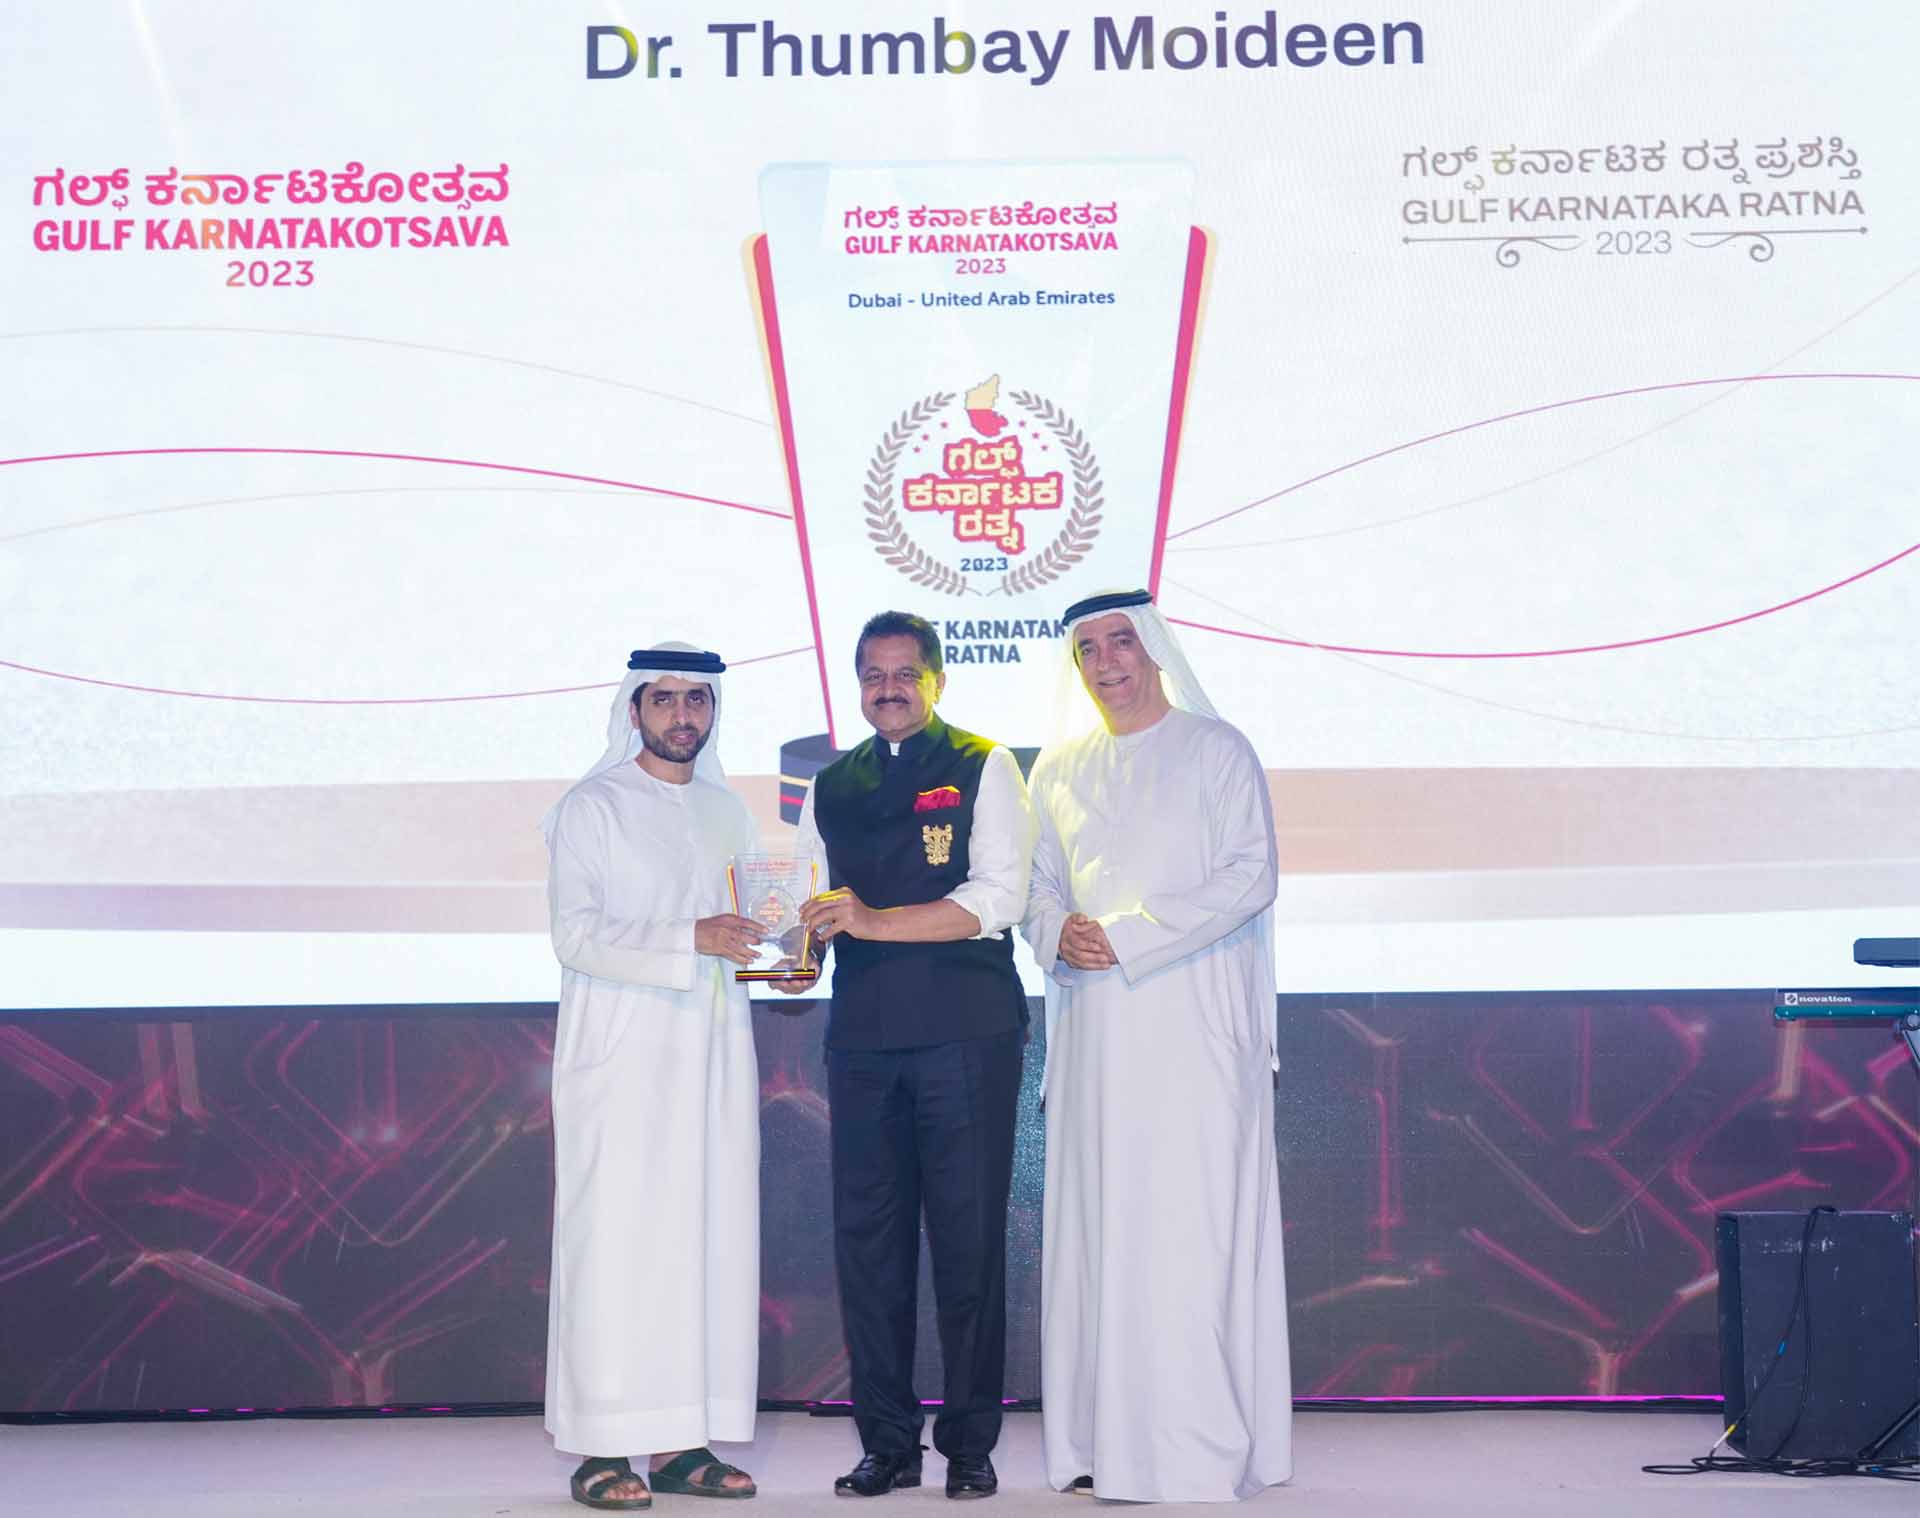 Dr. Thumbay Moideen Honored with Gulf Karnataka Ratna Award2023, Recognized as a No 1 NRI Leader and Most Influential Icon from Karnataka